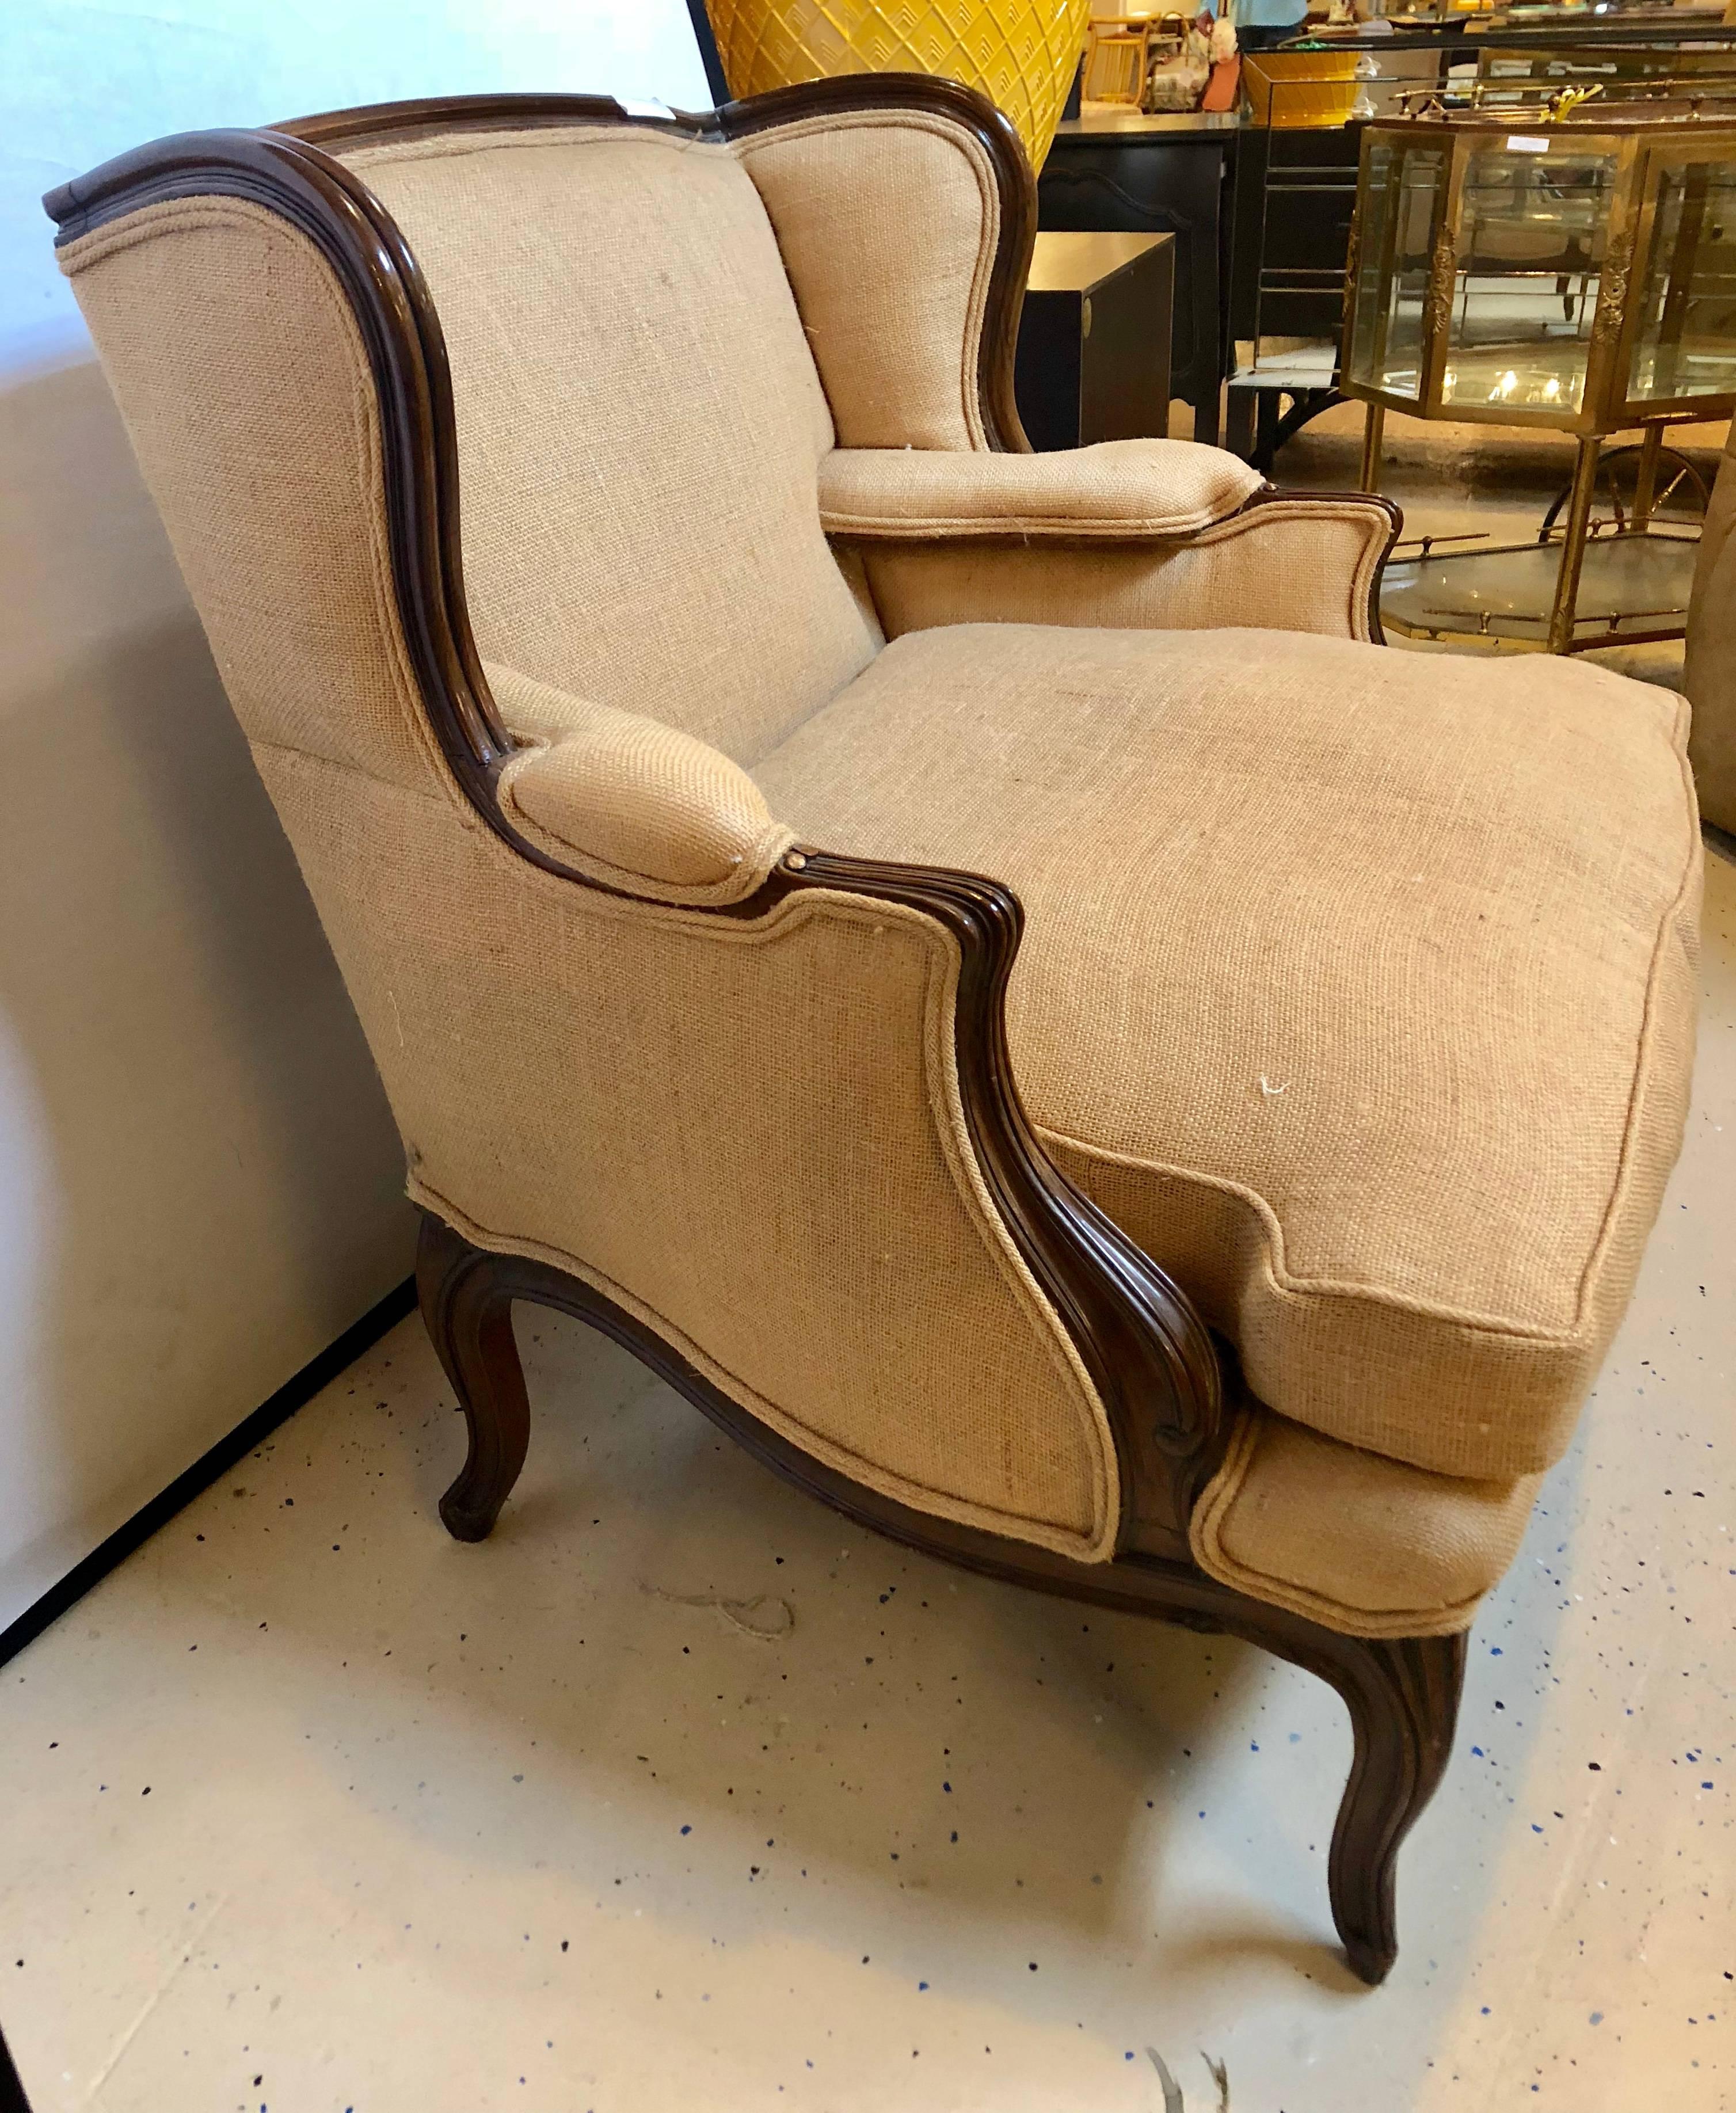 Oversized Wingback Marquis Chair Upholstered in Burlap Carved Wood Details 2